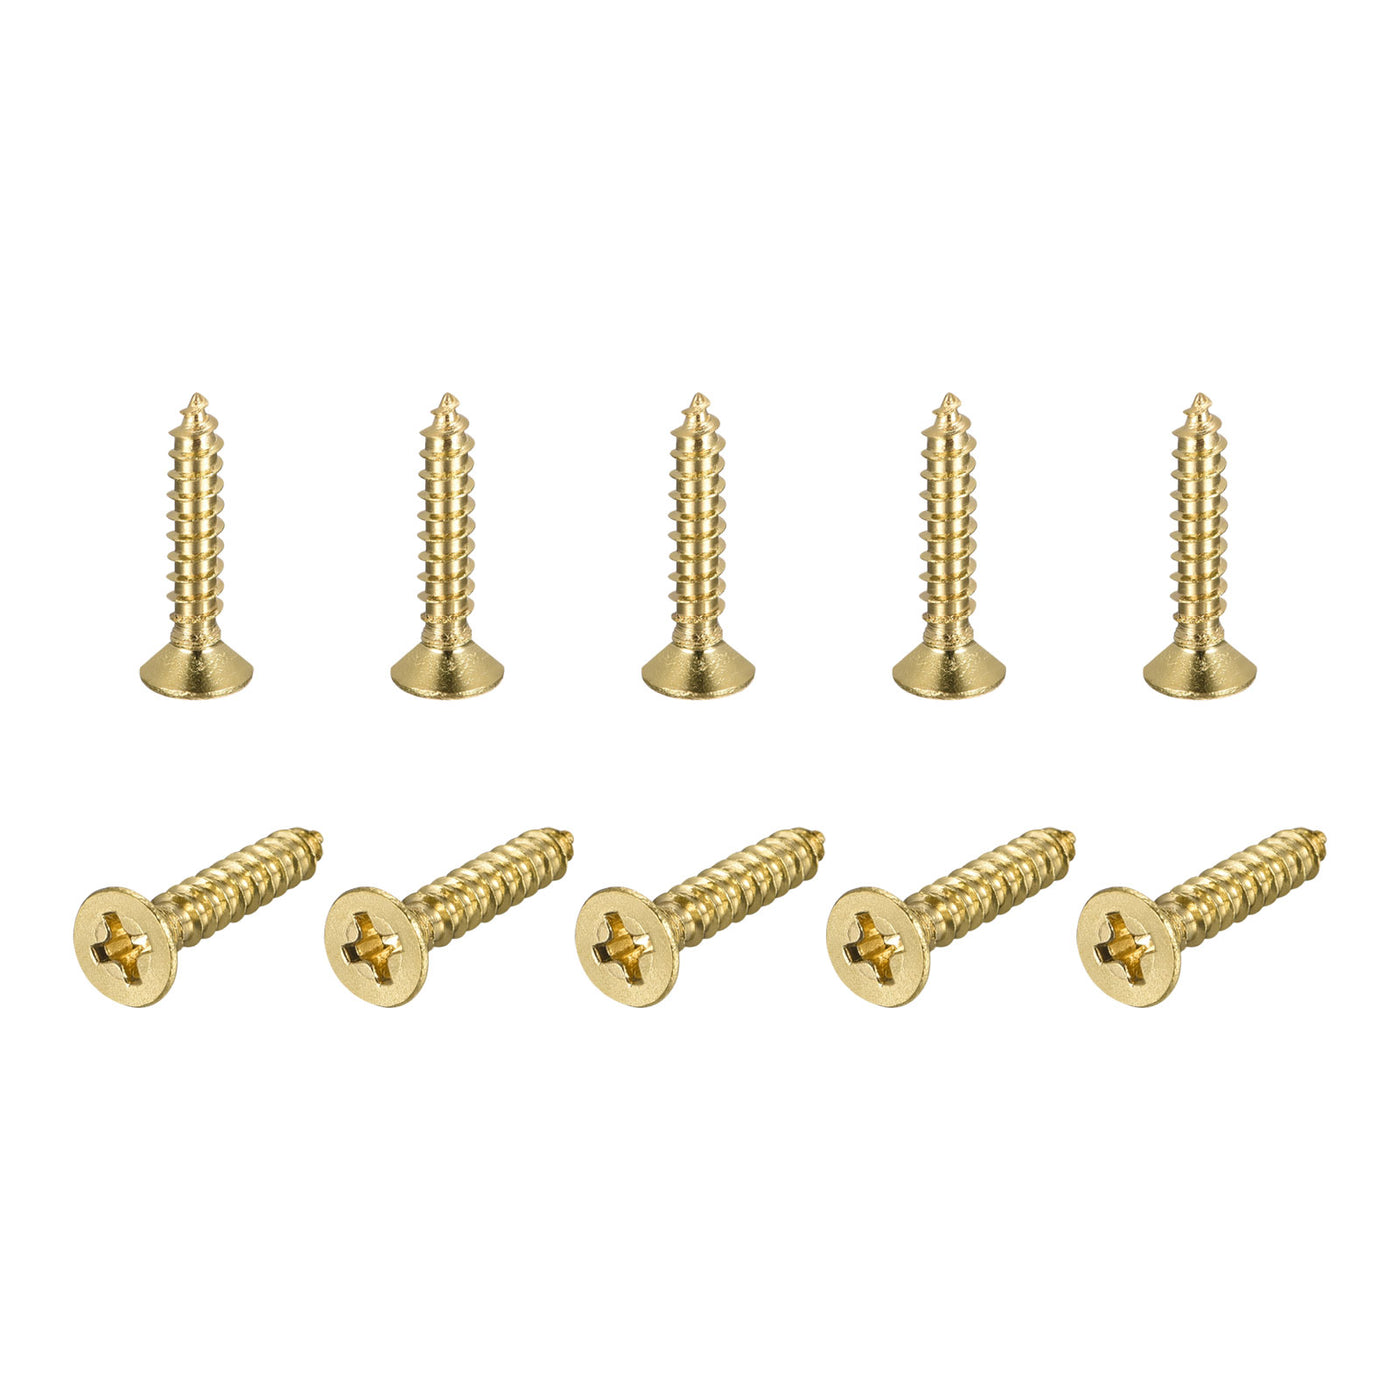 Uxcell Uxcell Brass Wood Screws, M4x20mm Phillips Flat Head Self Tapping Connector for Door, Cabinet, Wooden Furniture 25Pcs